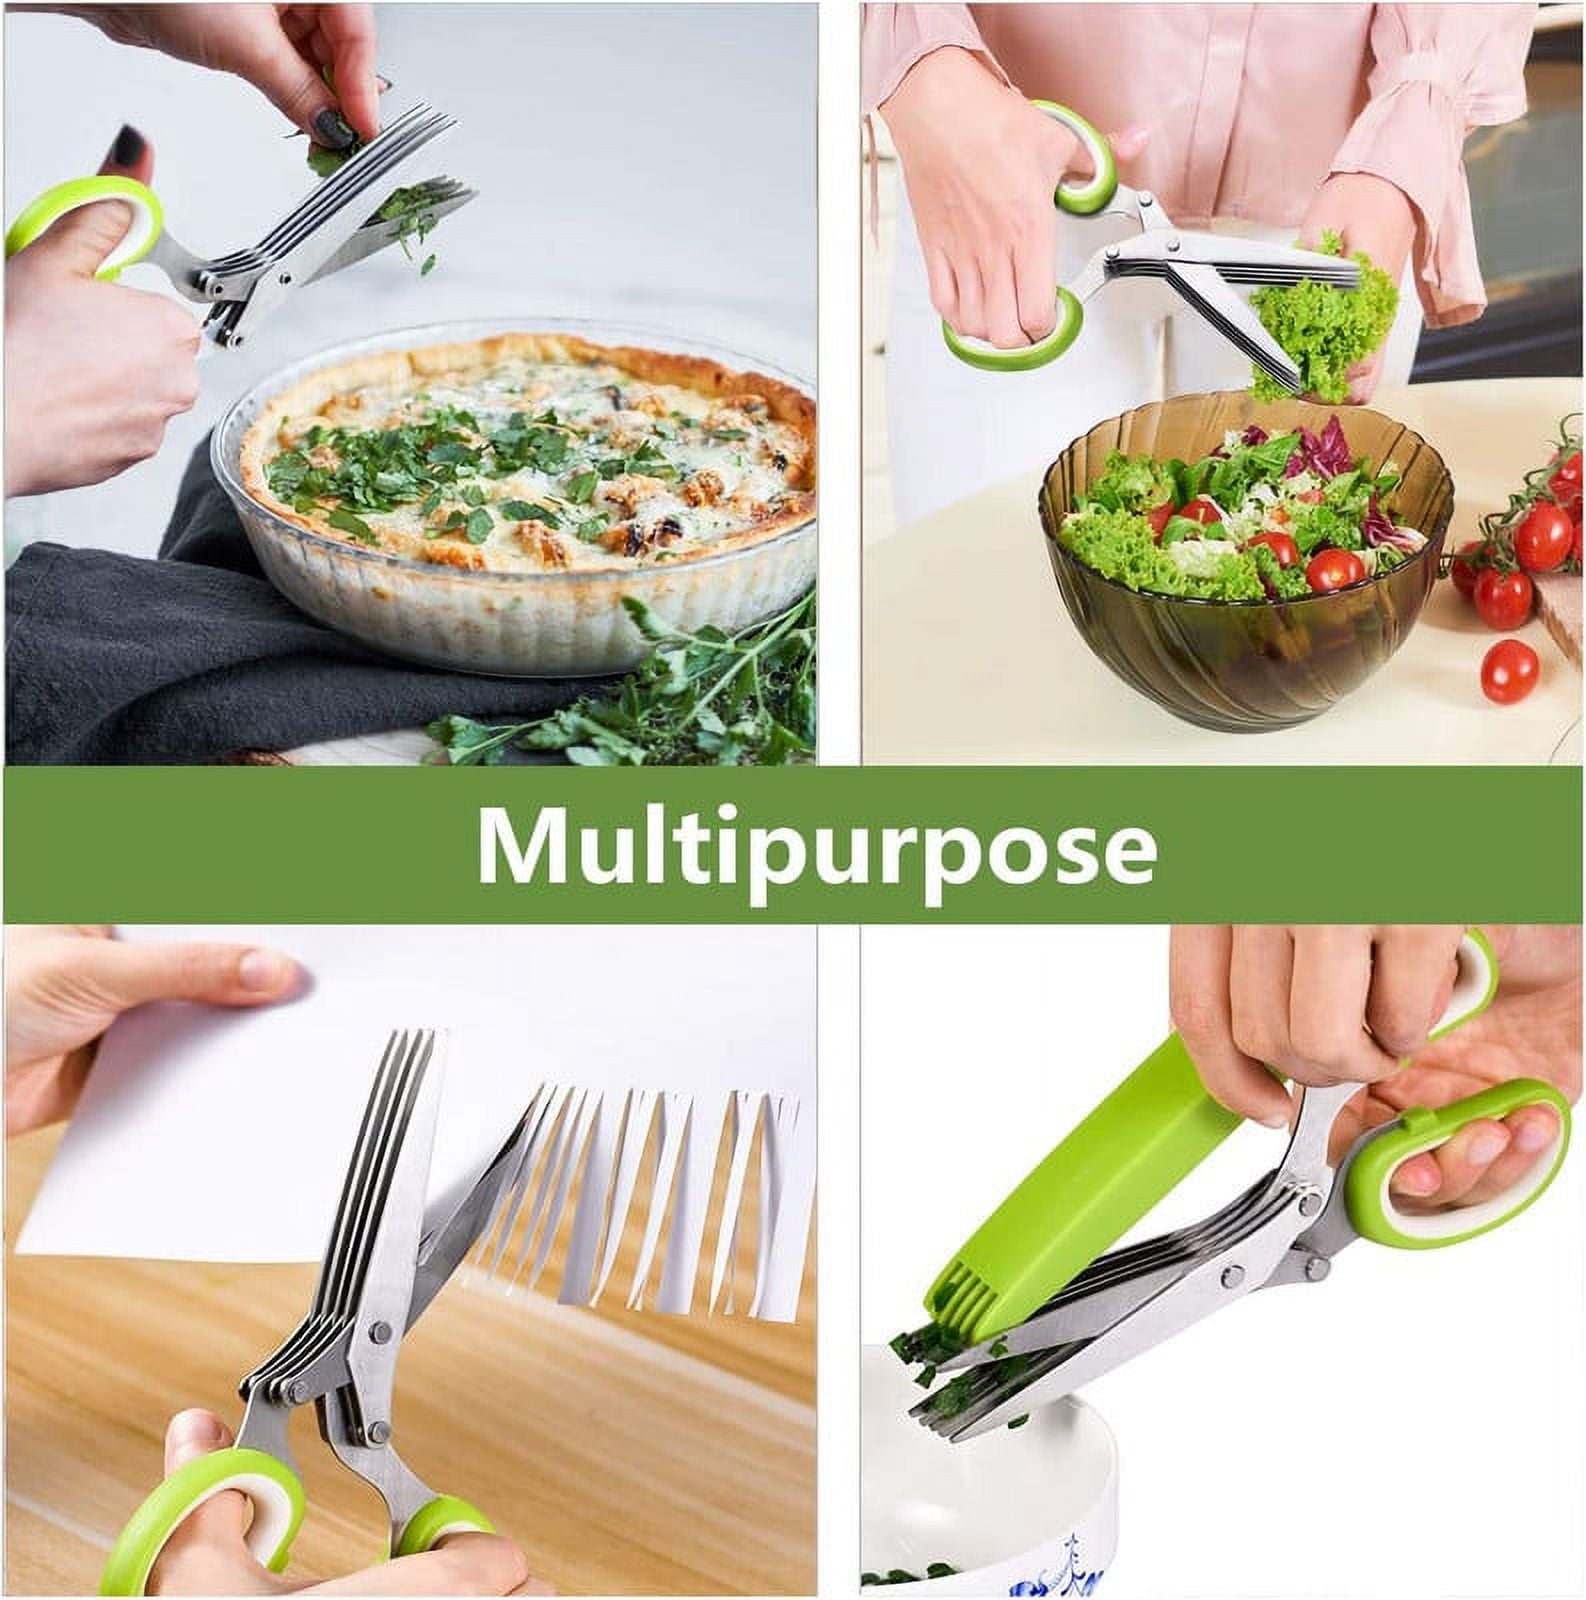 Jenaluca Herb Scissors with 5 Blades and Safety Cover - Cut, Chop & Mince  Fresh Herbs & Leafy Greens - Stainless Steel Kitchen Shears with Cleaning